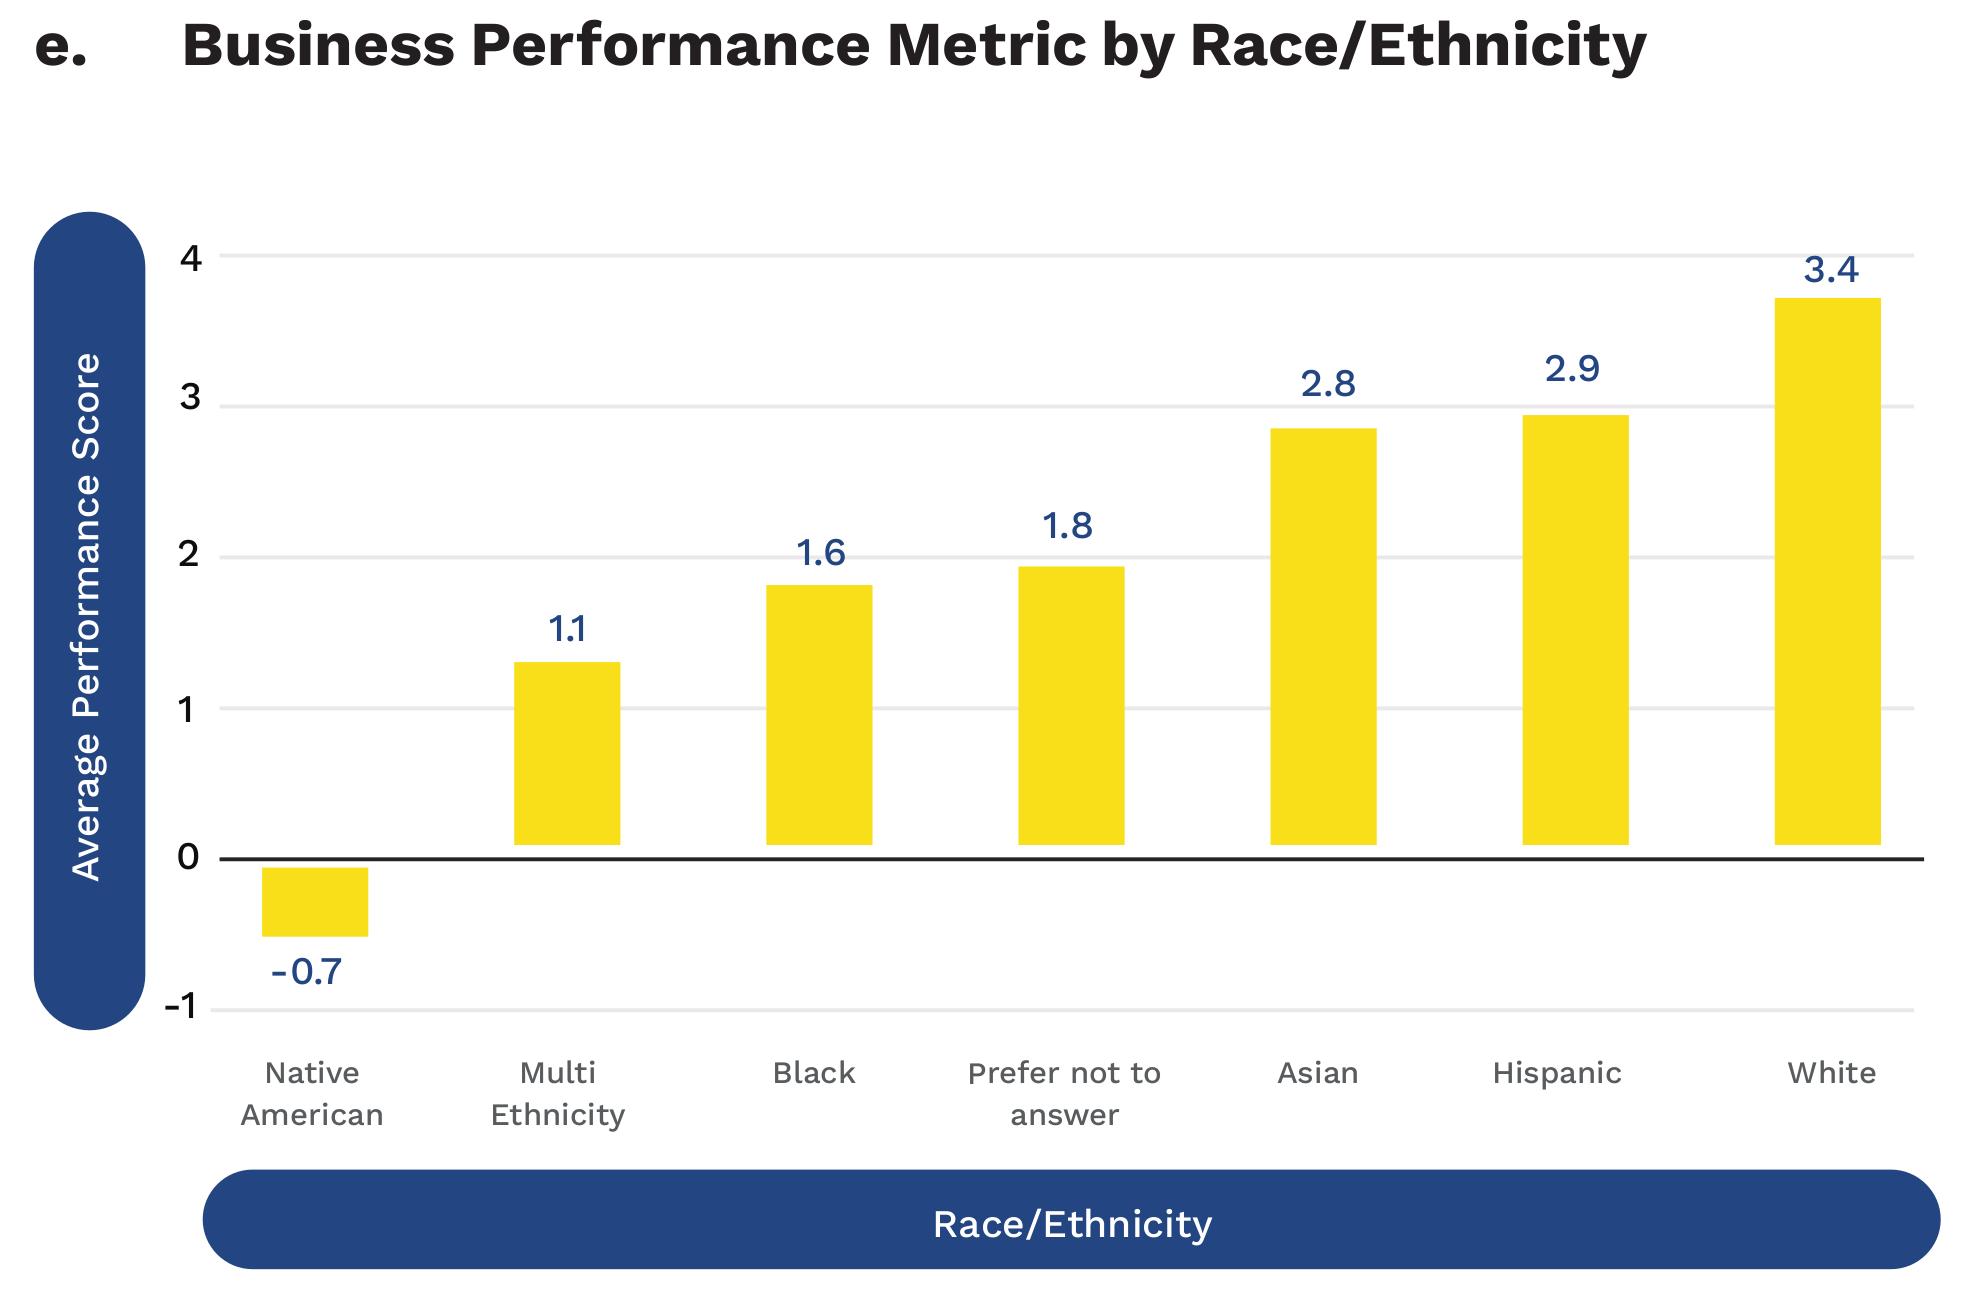 Business Performance Metric by Race/Ethnicity